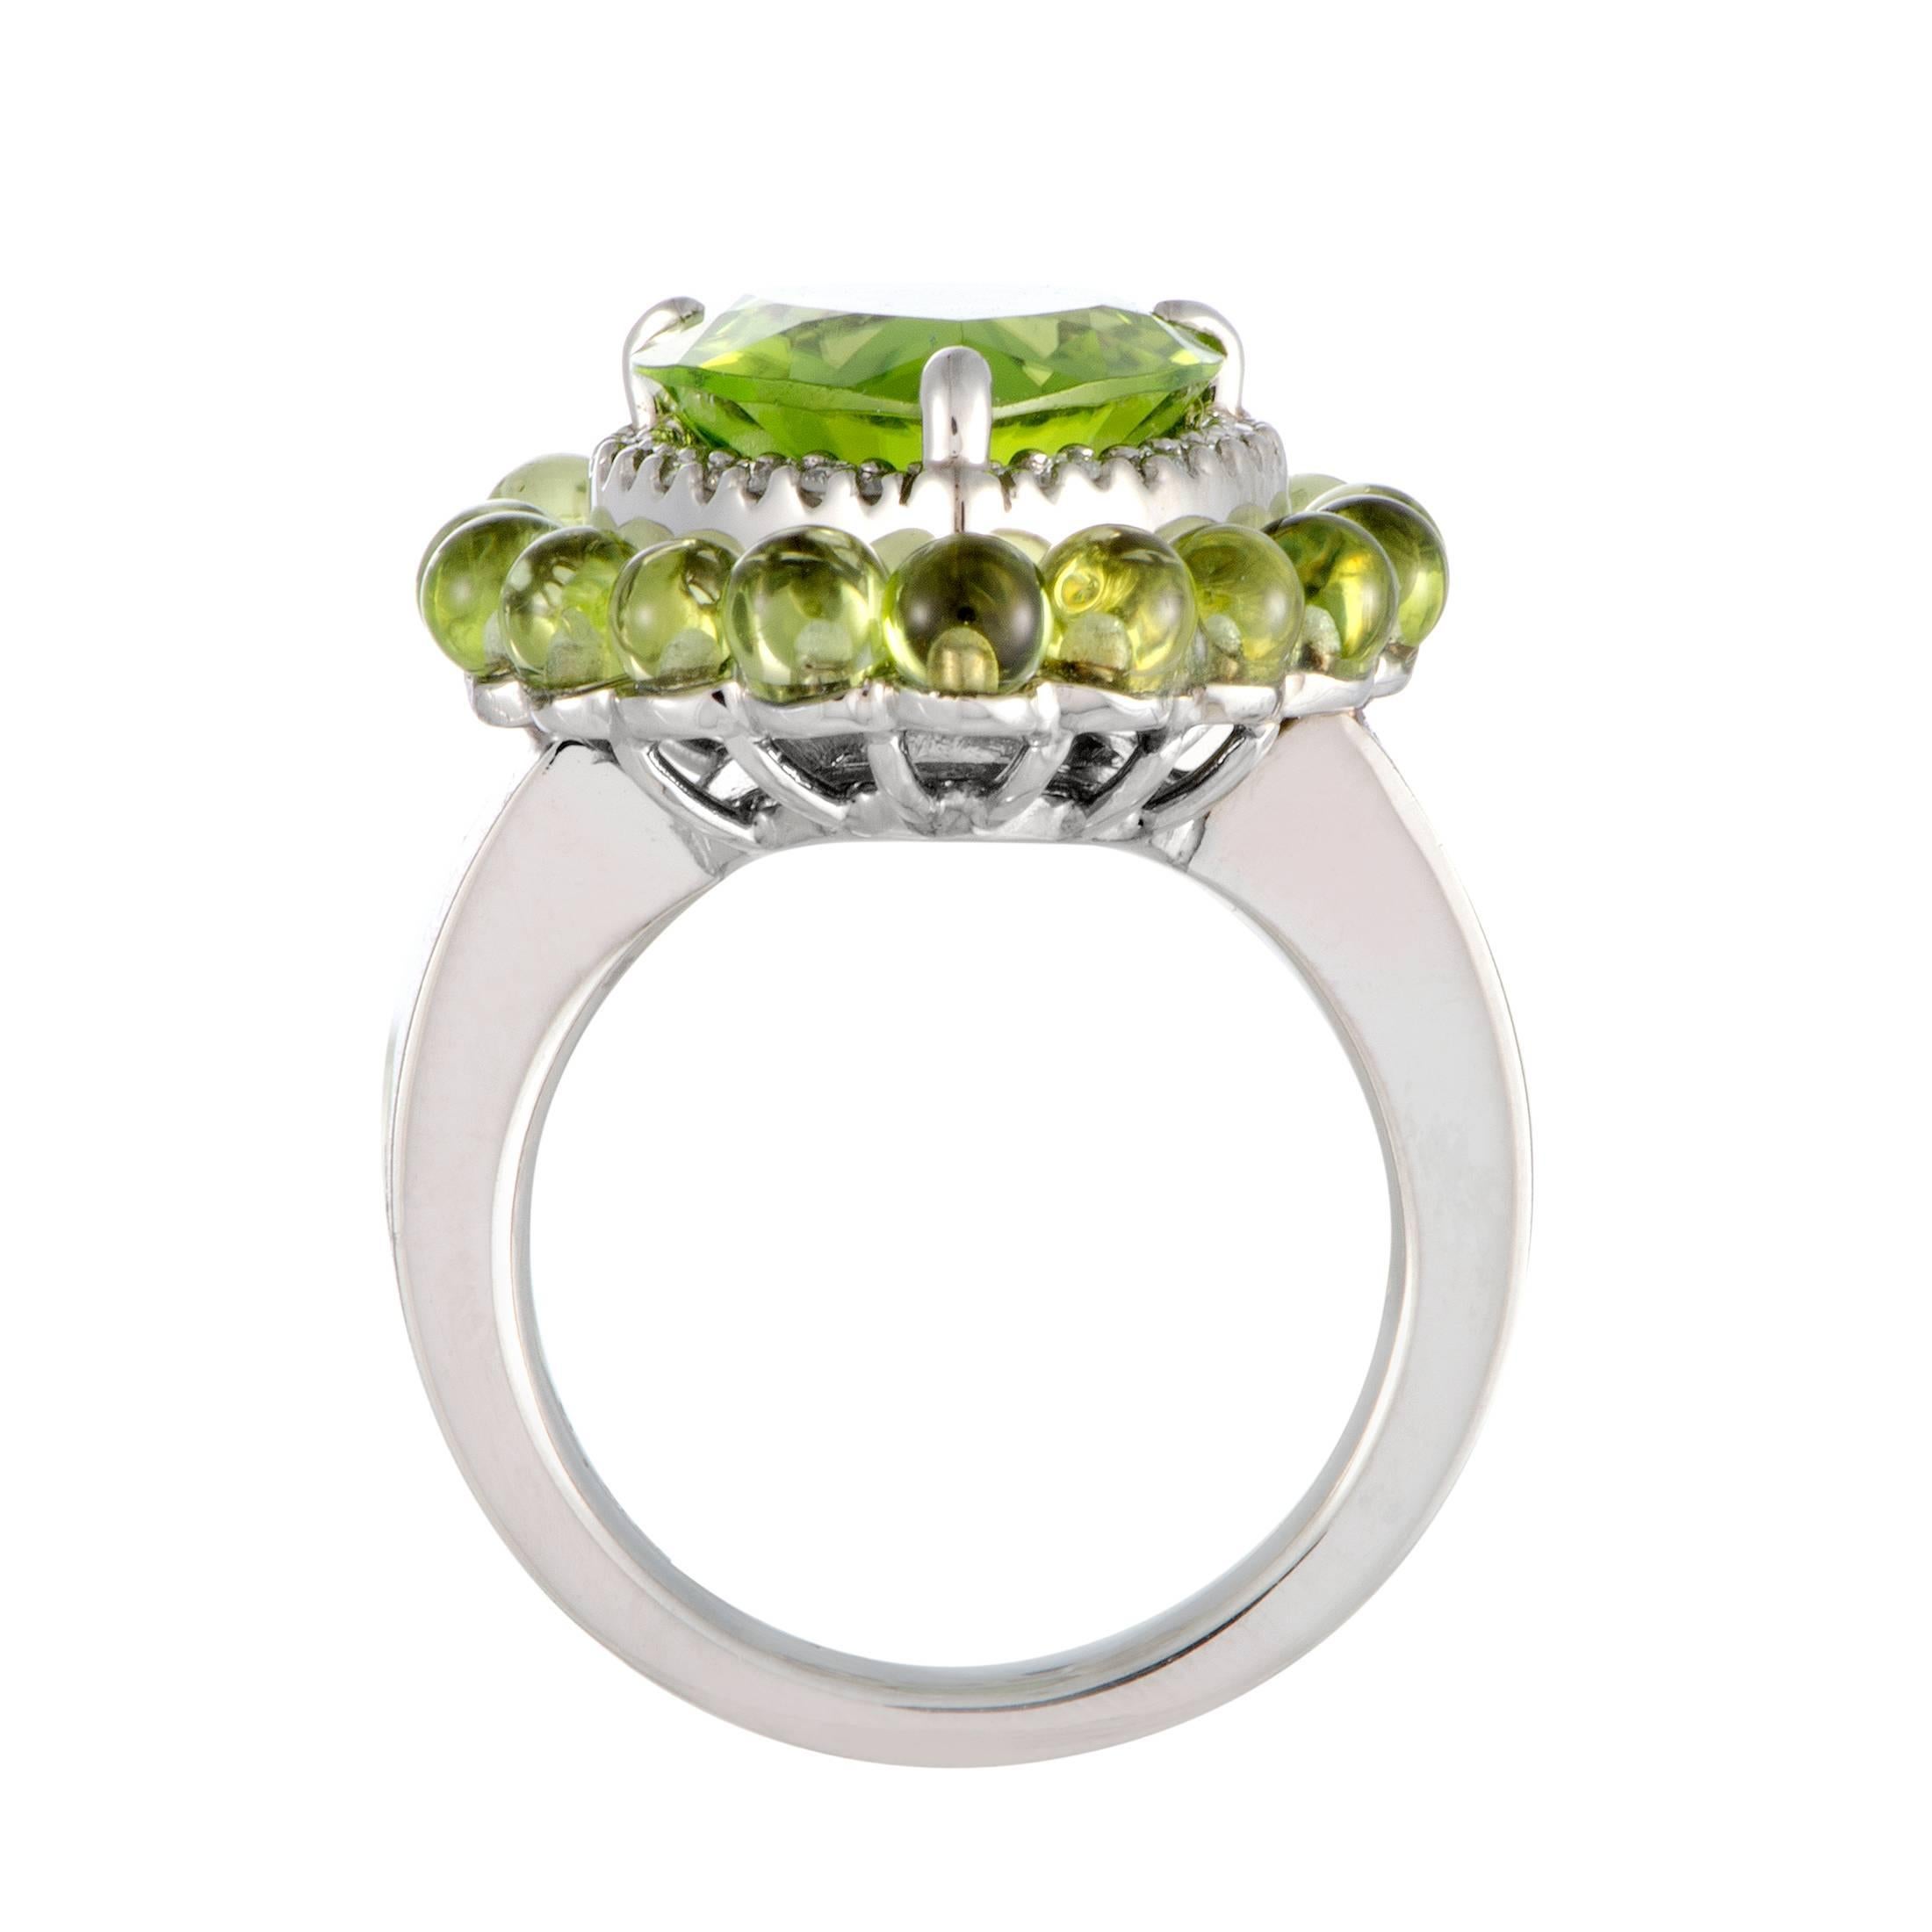 The stunning color and exquisite cut of the central peridot weighing 5.22 carats produce a fantastic sight which is brilliantly completed by the nifty side peridots totaling 4.34 carats as well as glittering diamonds amounting to 0.17 carats in this